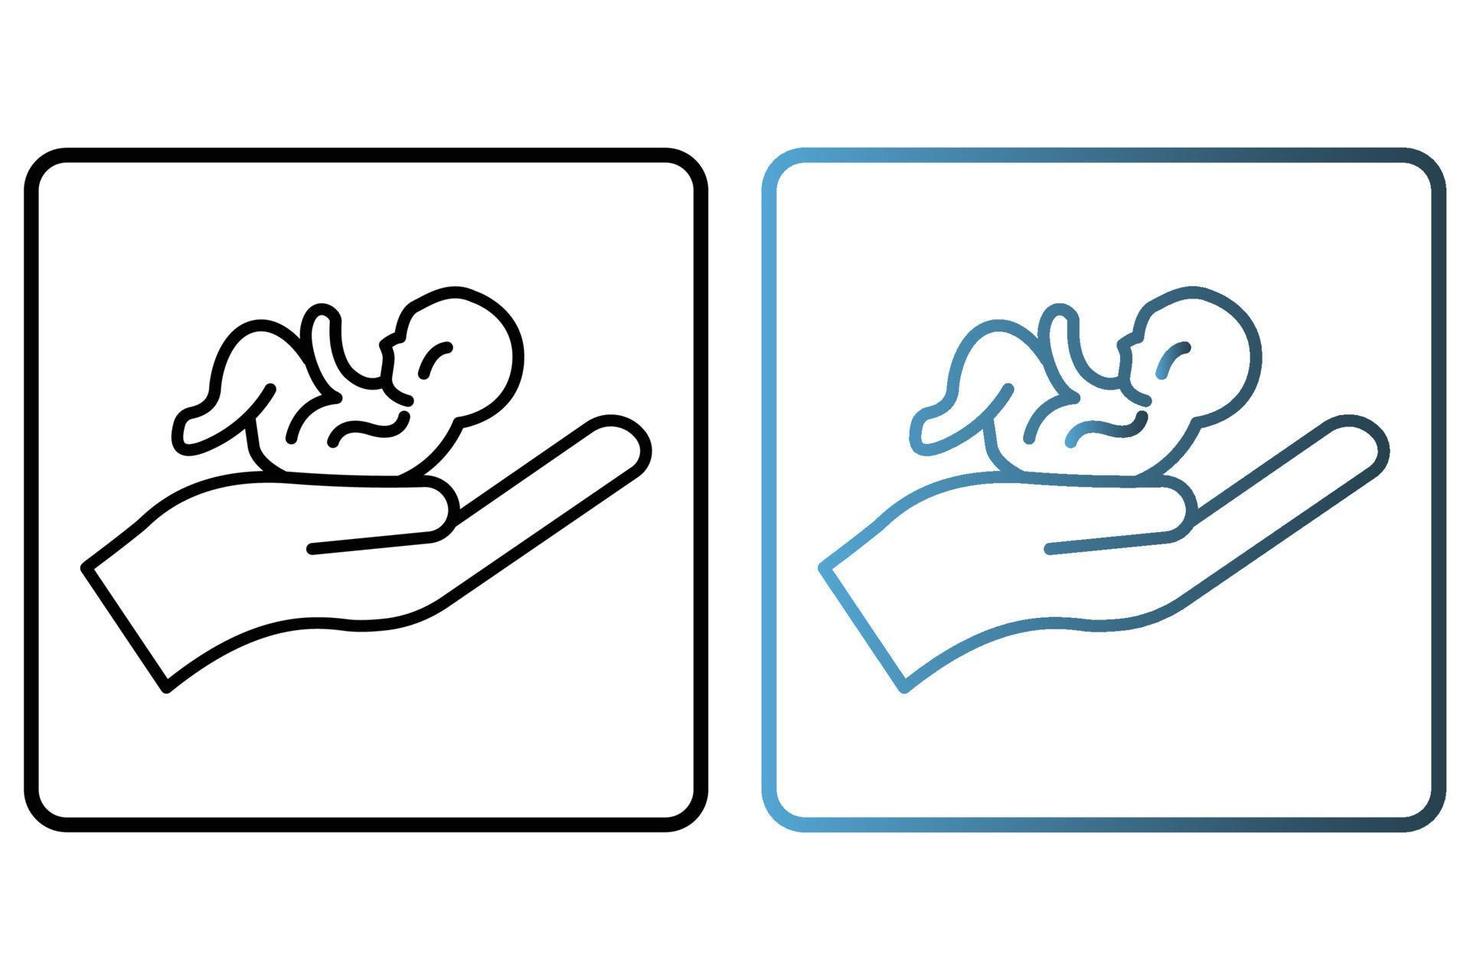 Safe baby icon illustration. icon related to baby care. outline icon style. Simple vector design editable